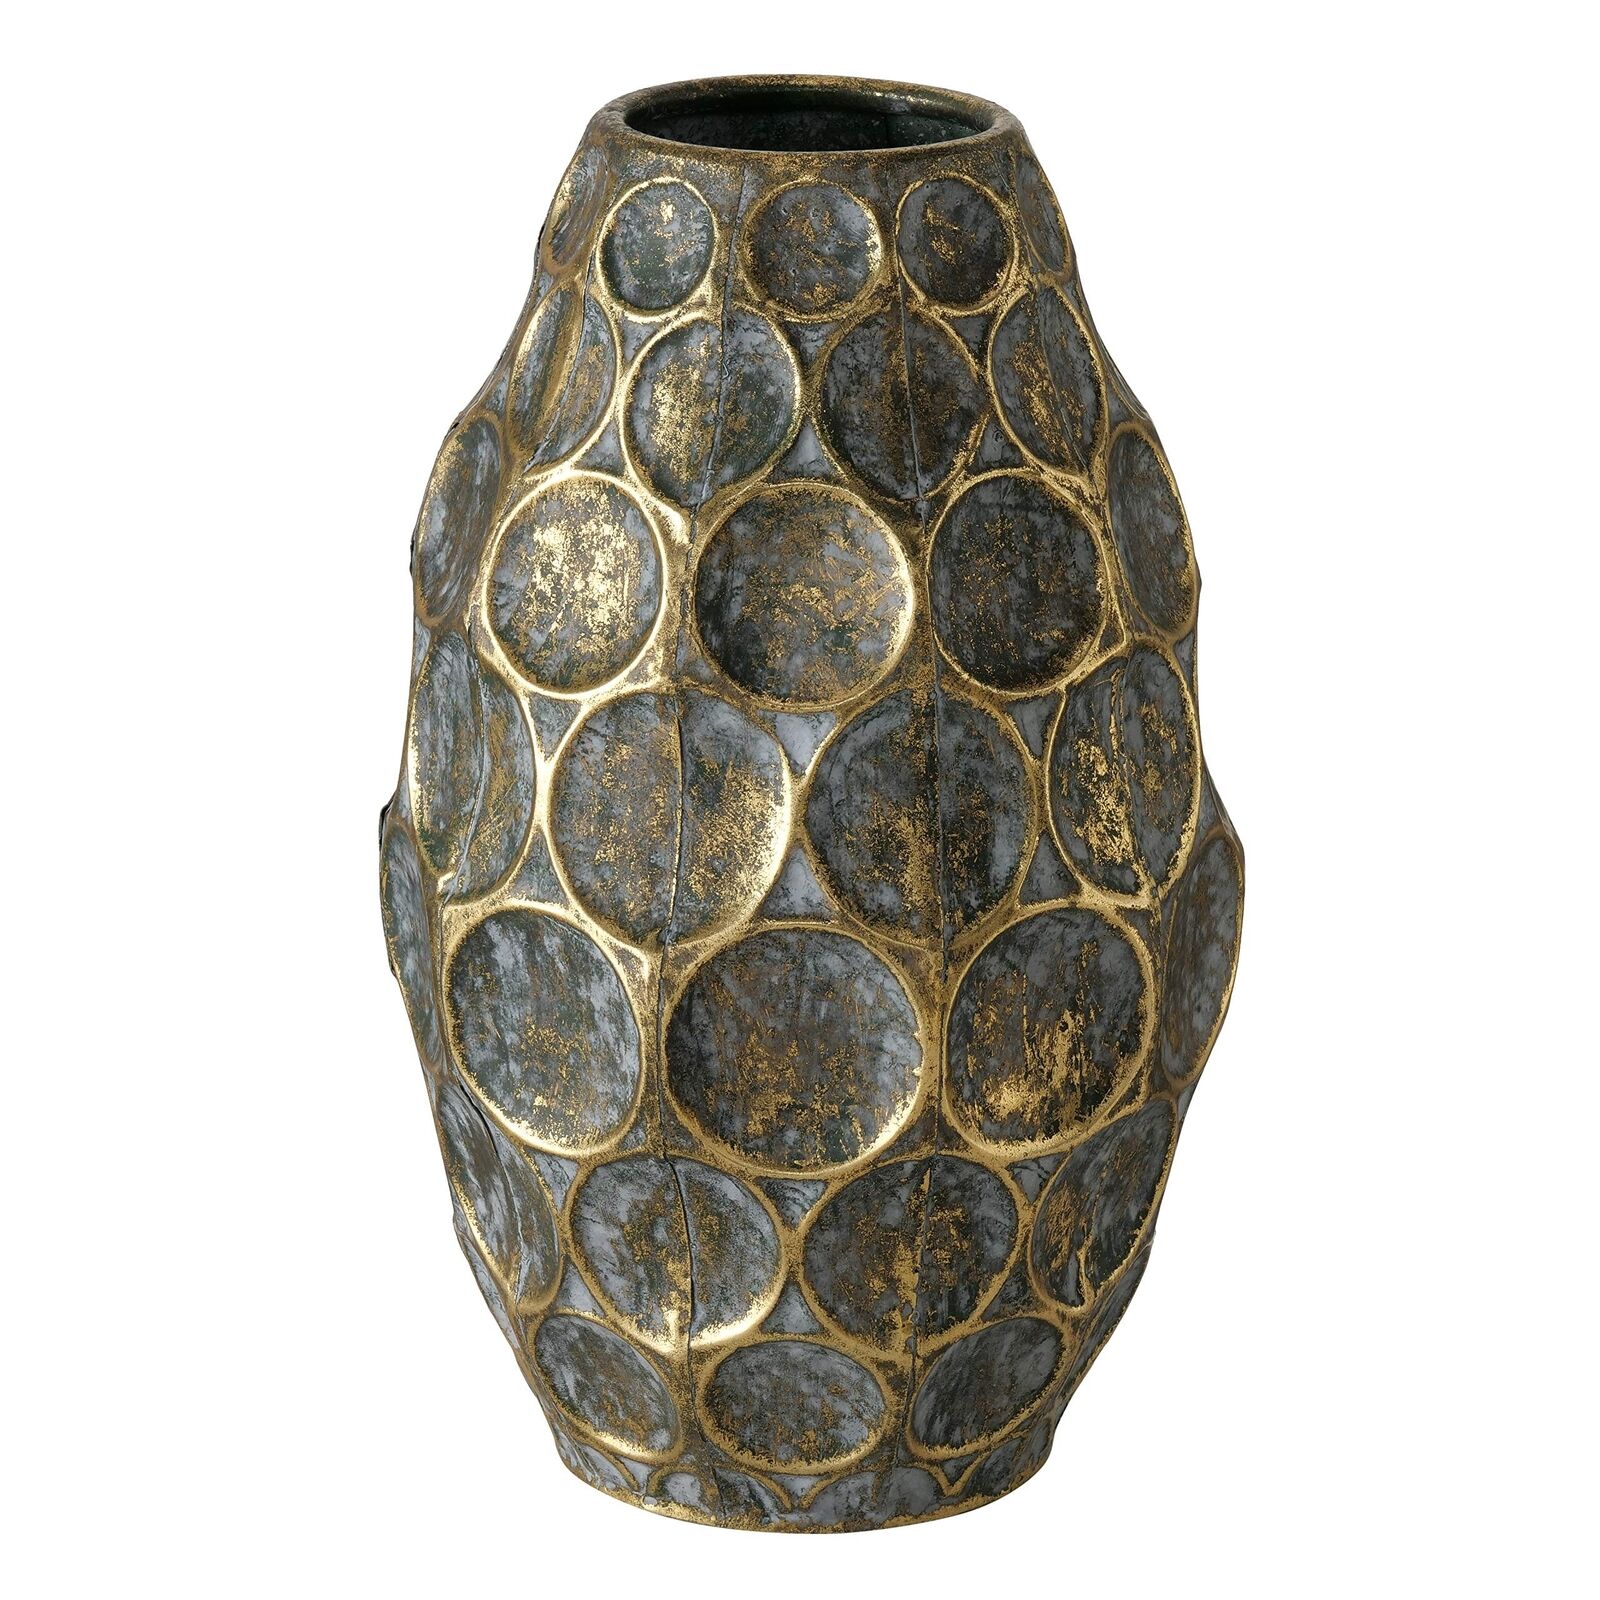 WHW Whole House Worlds Tooled Antique Gold Finished Metal Vase, Sculptural Ri...